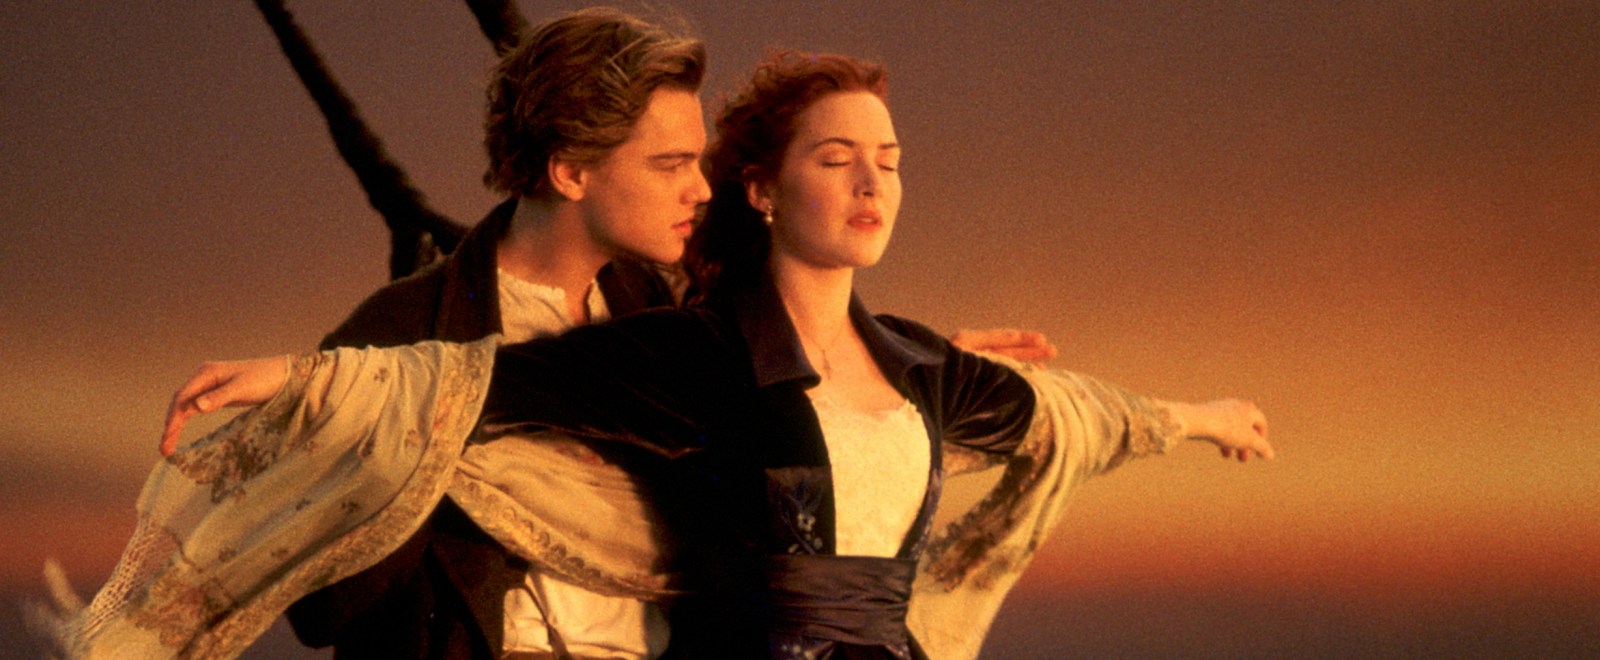 Kate Winslet Did Not Exactly Enjoy Becoming Super Famous After ‘Titanic’: ‘Quite Unpleasant’